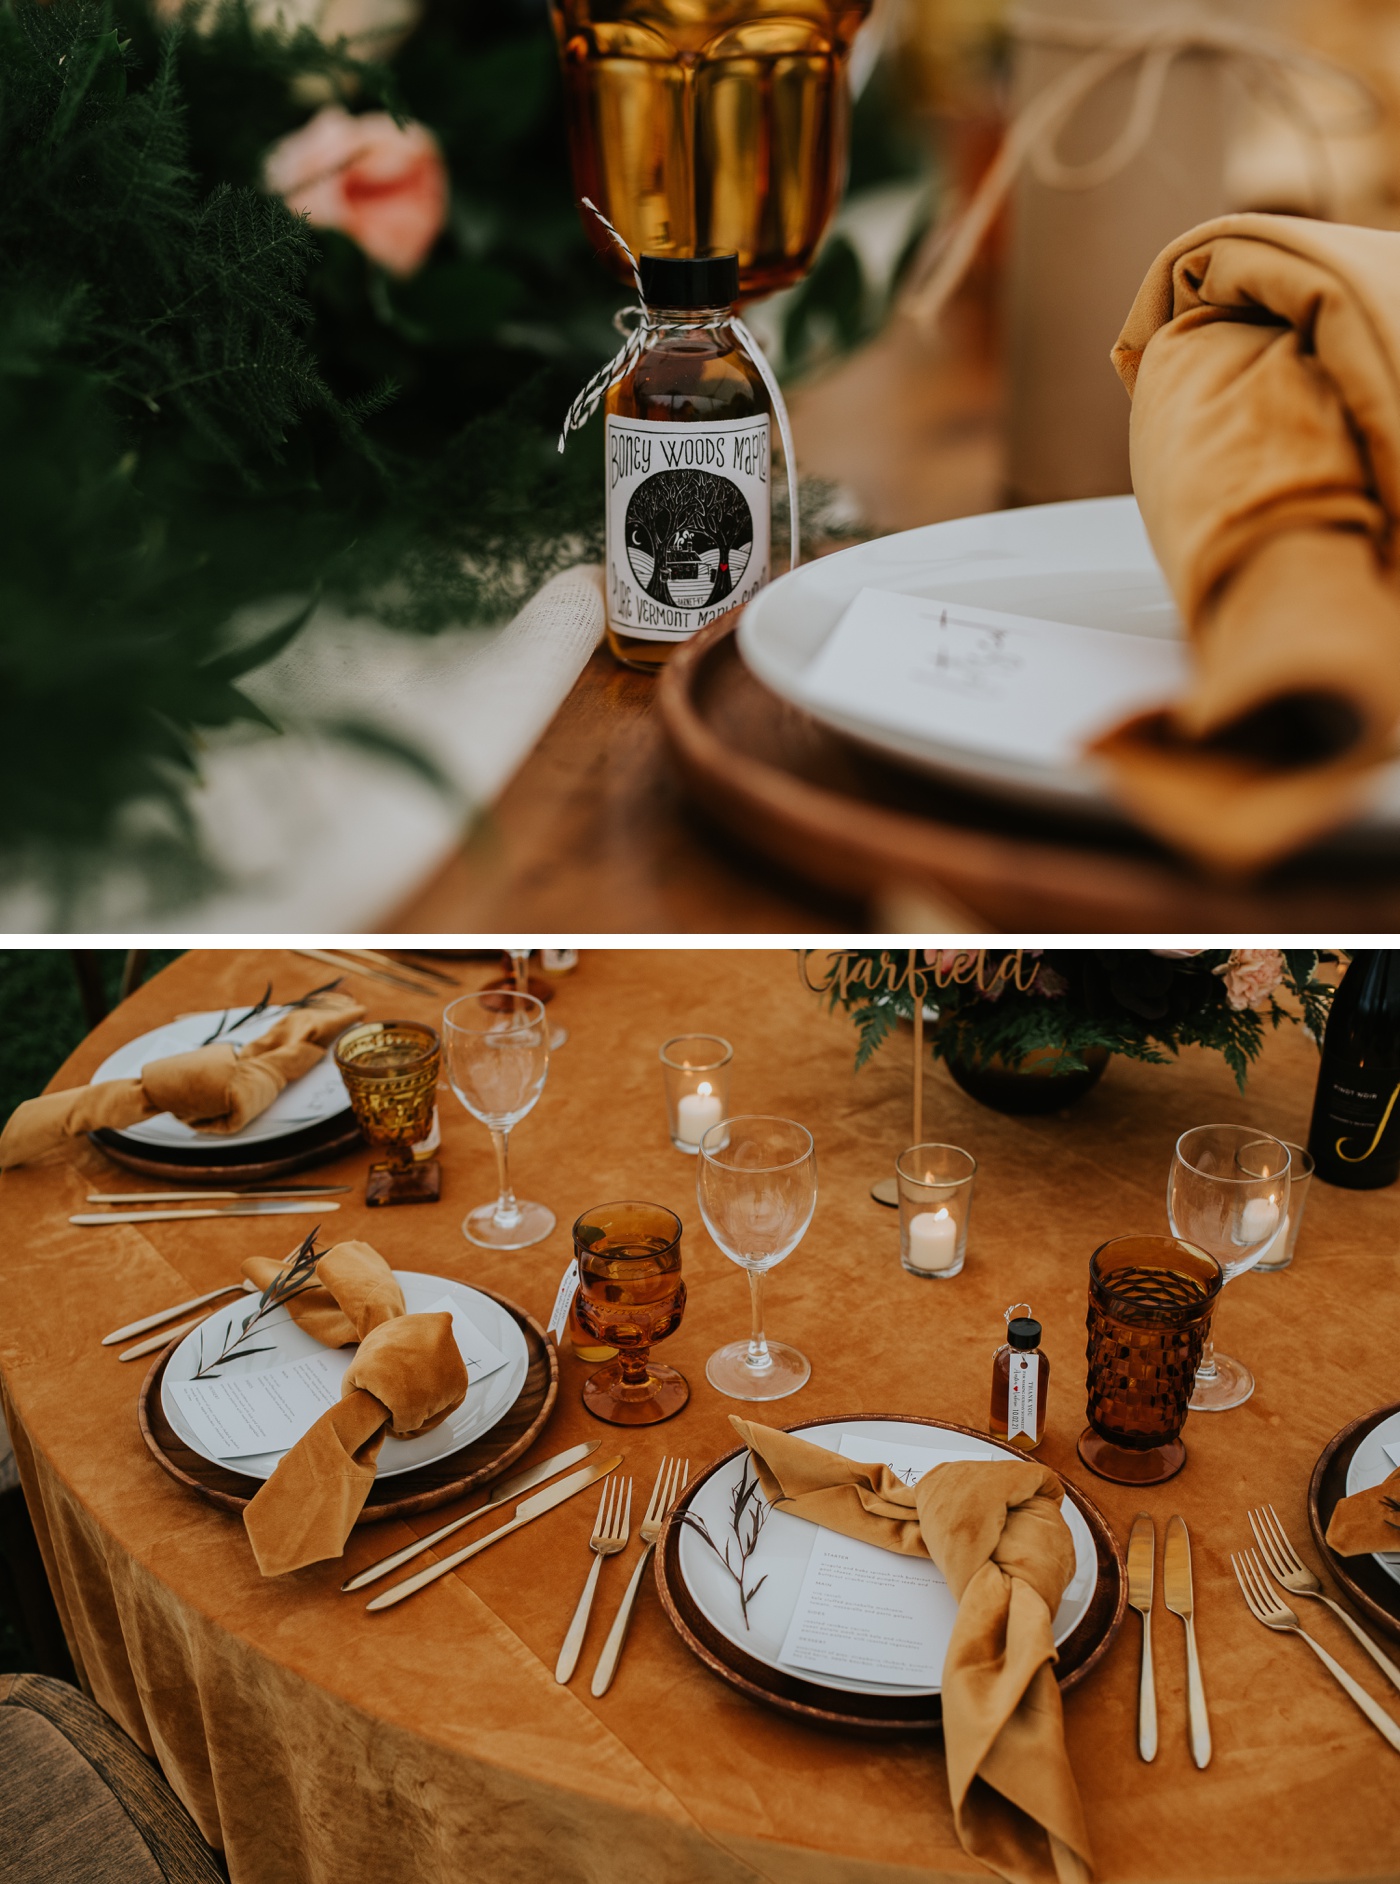 Marigold tablecloths, amber glasses, and honey napkins for a fall tented wedding reception